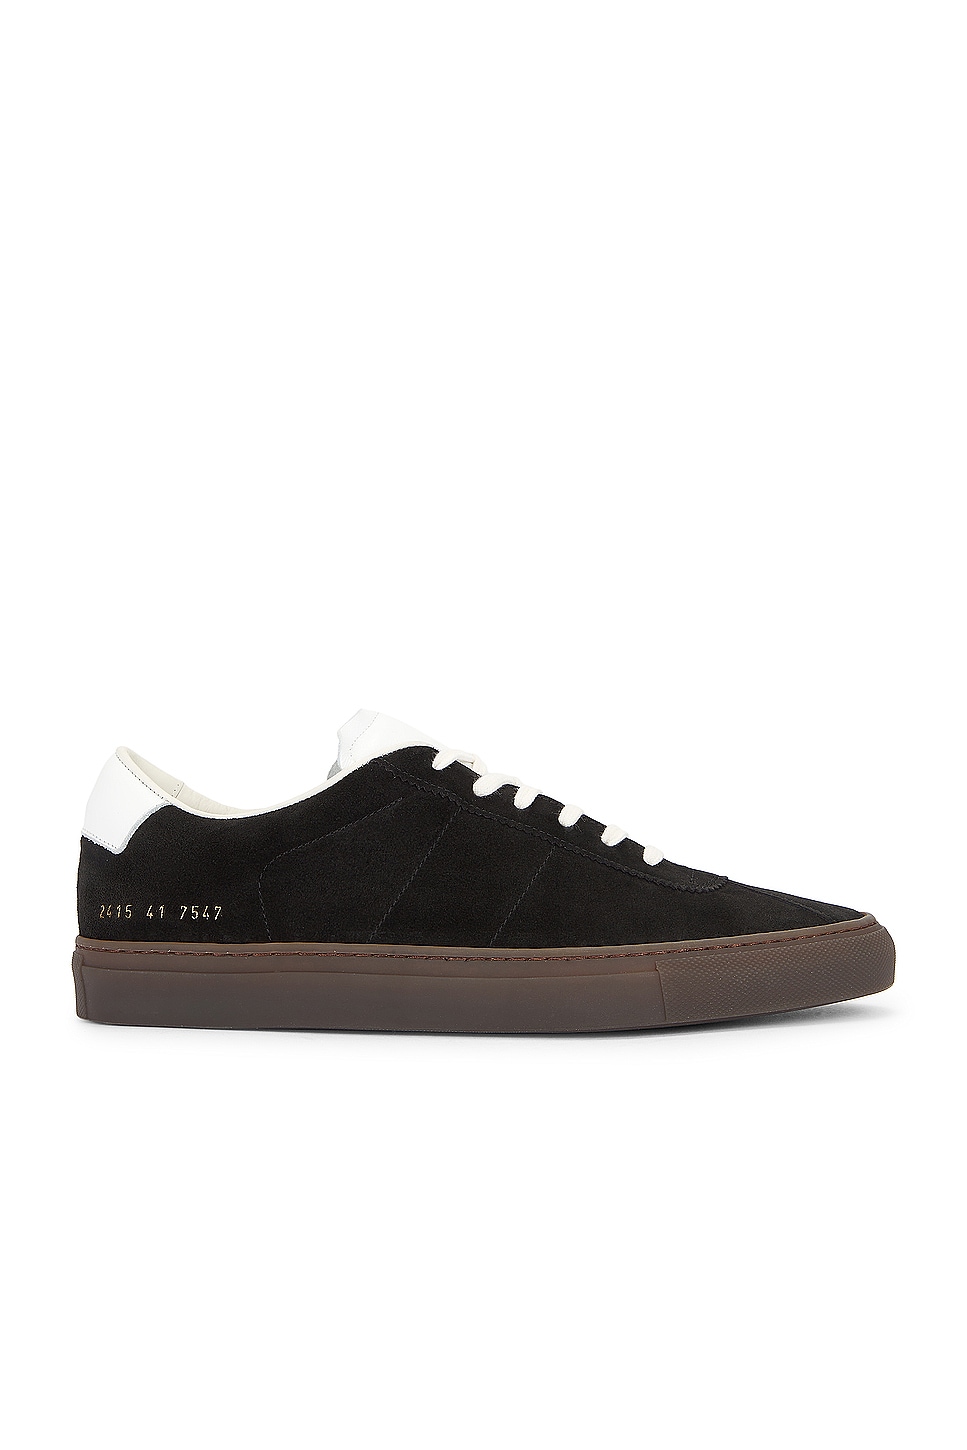 Image 1 of Common Projects Tennis 70 Sneaker in Black